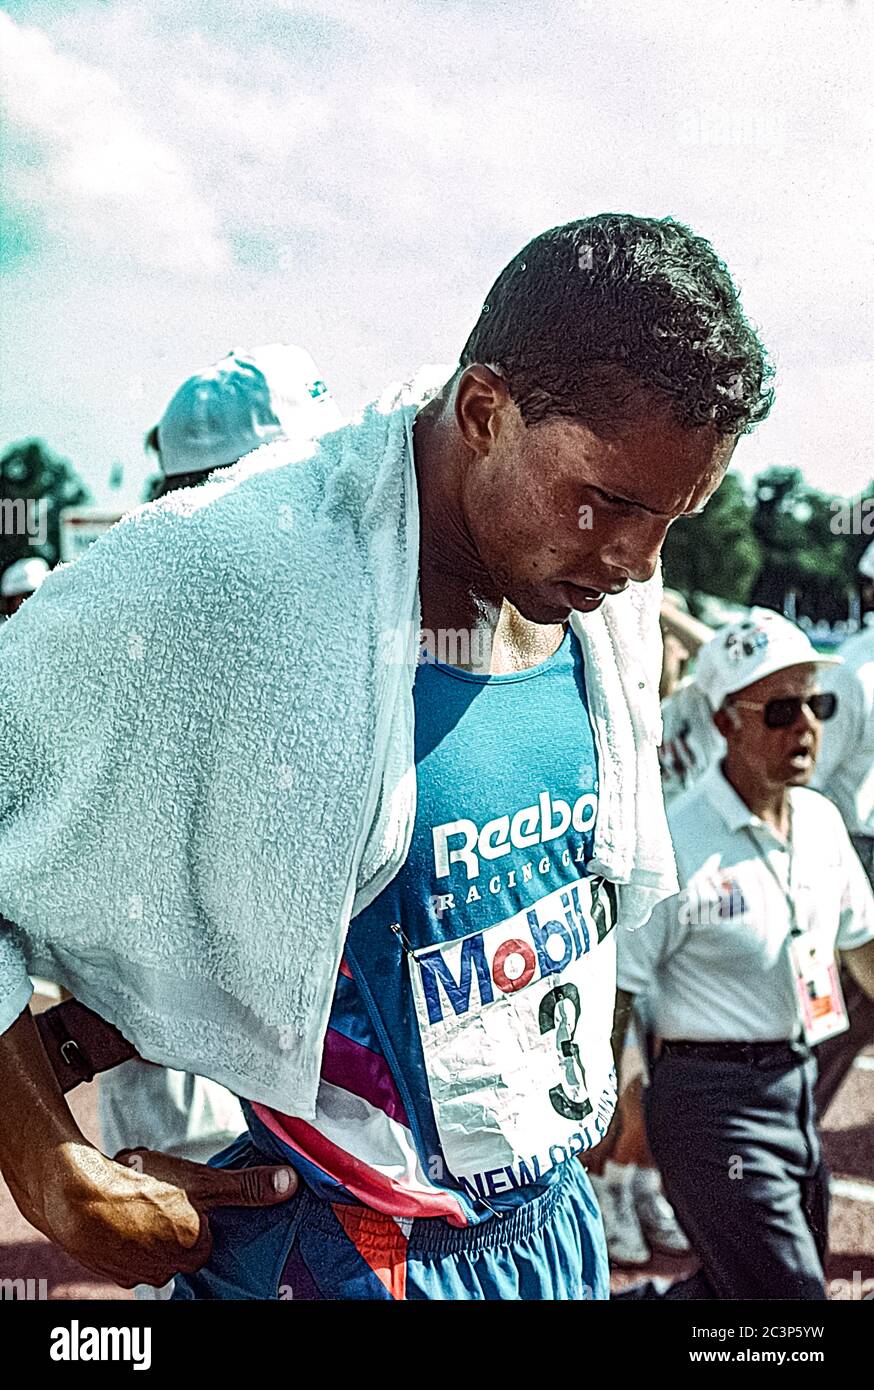 Dan O'Brien (USA) competing in the  decathlon at the 1992 US Olympic Track and Field Team Trials Stock Photo